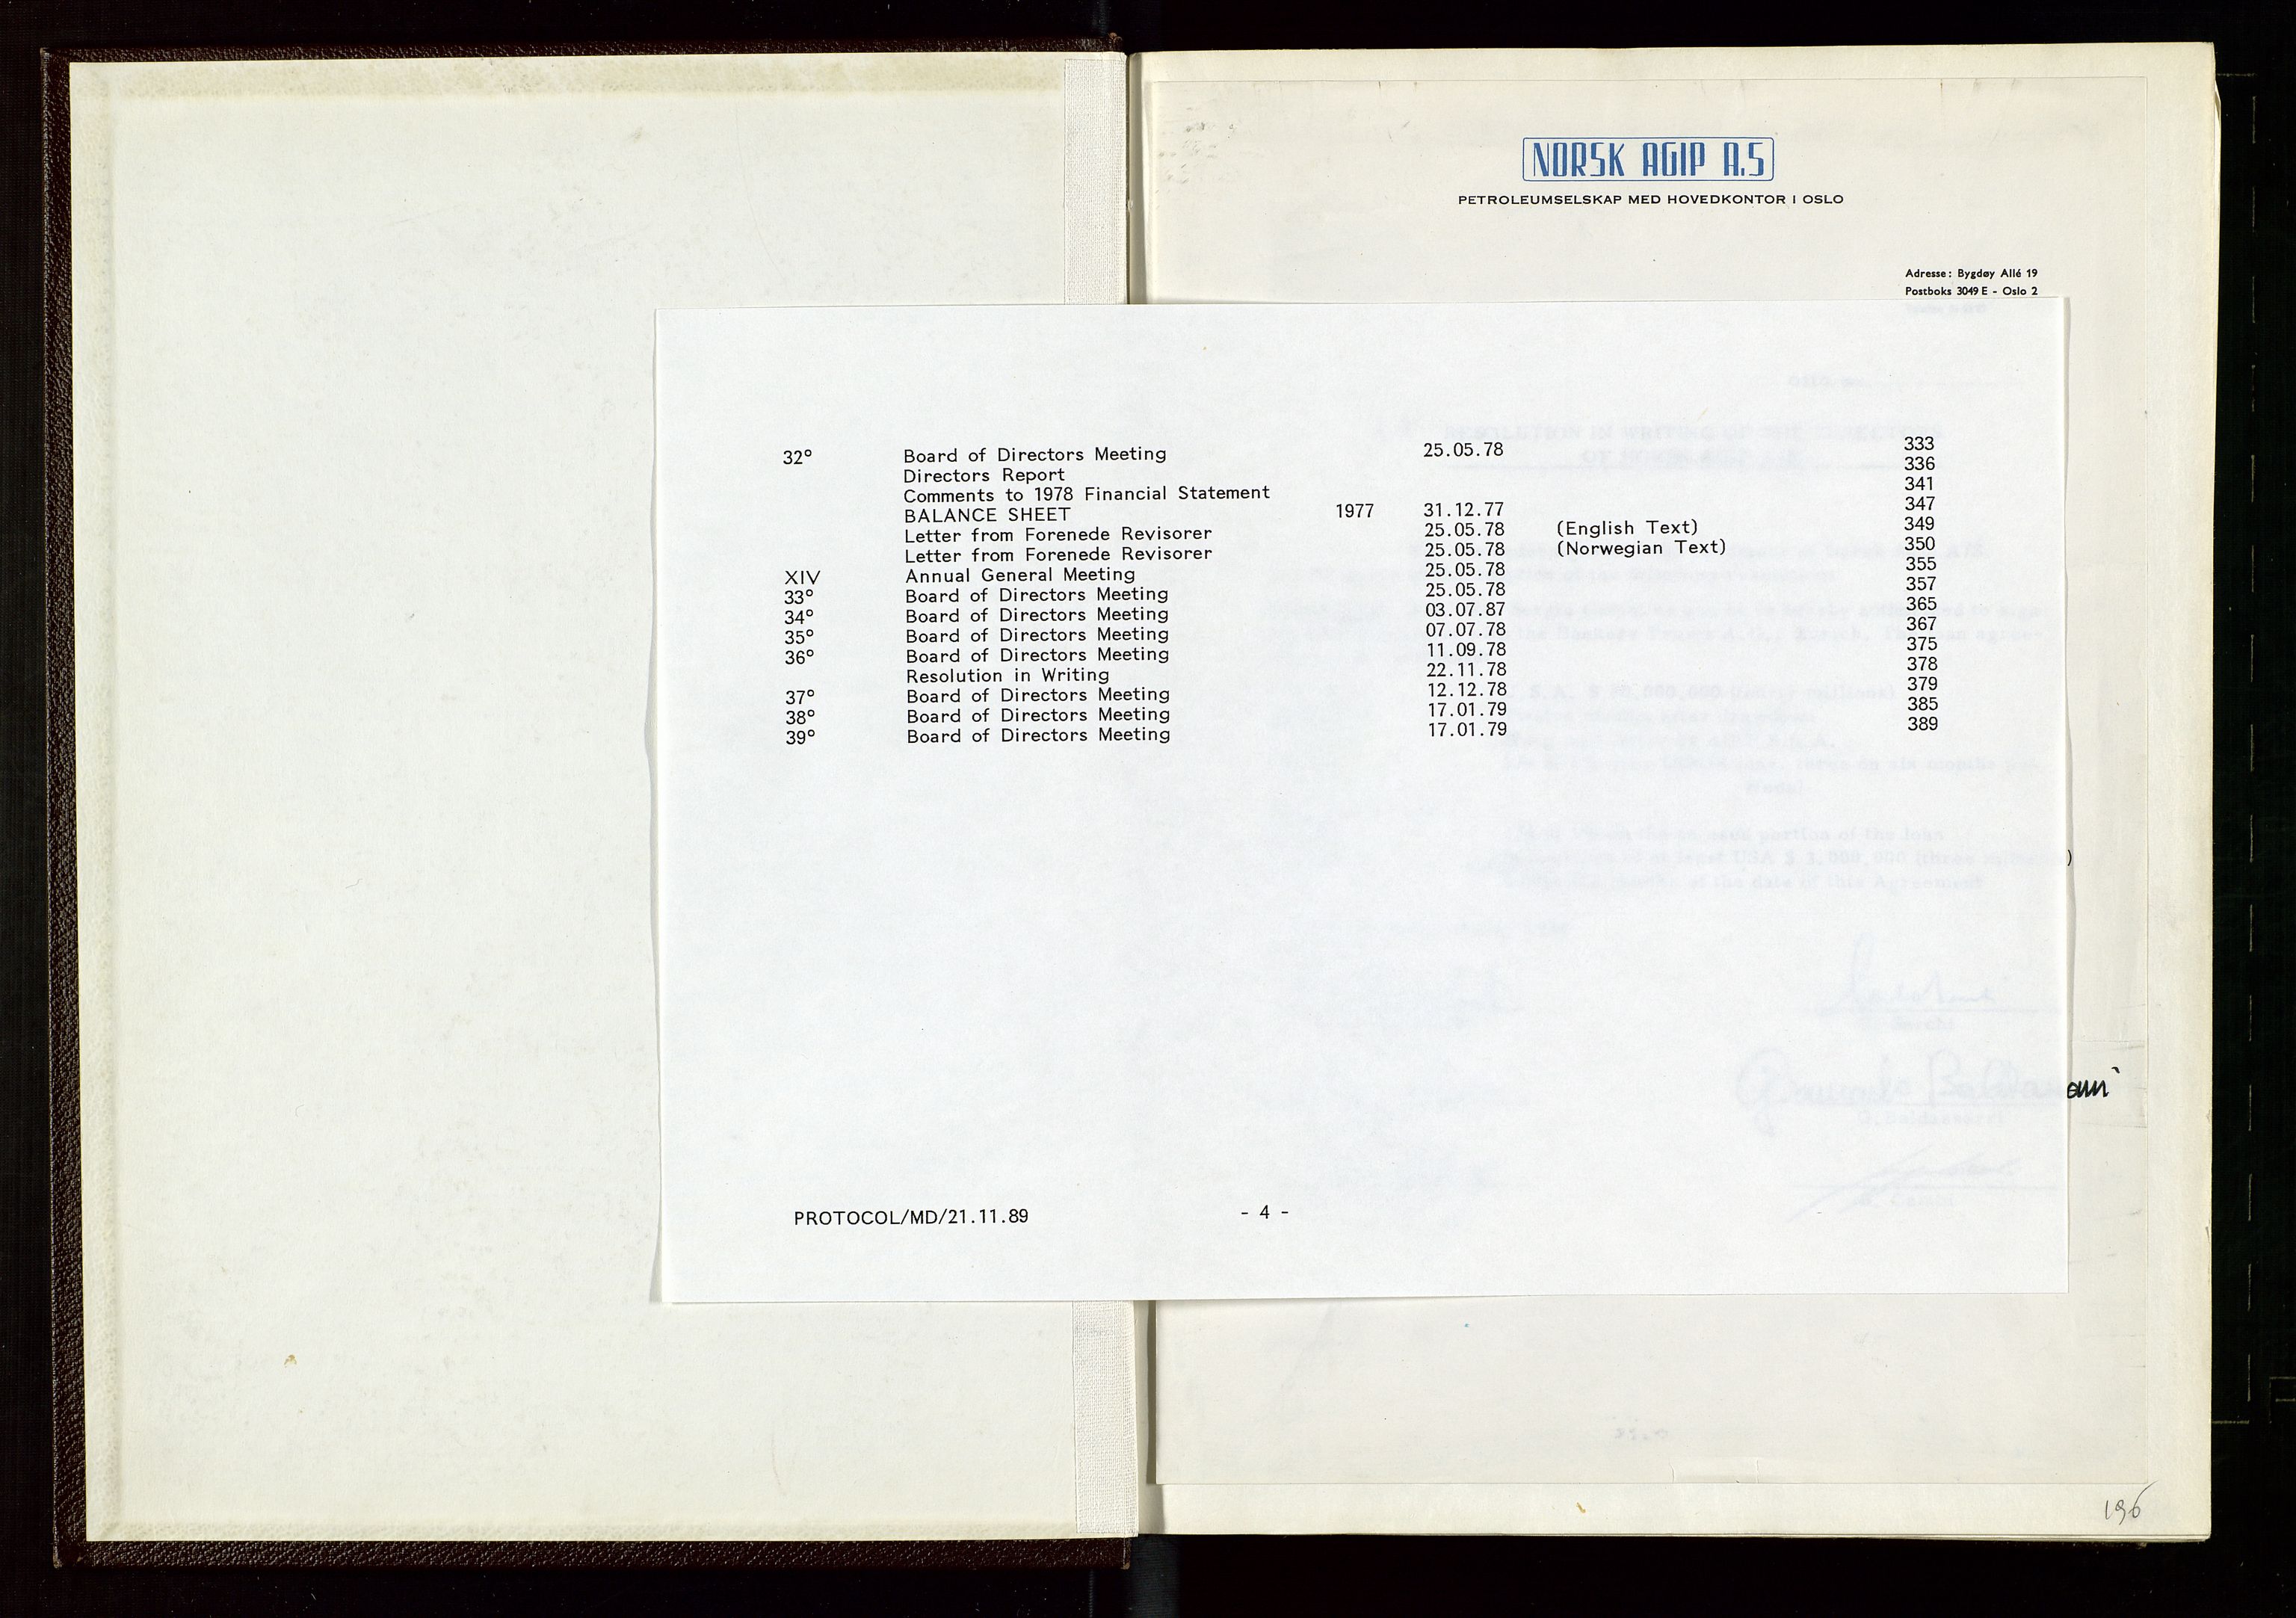 Pa 1583 - Norsk Agip AS, SAST/A-102138/A/Aa/L0002: General assembly and Board of Directors meeting minutes, 1972-1979, p. 196